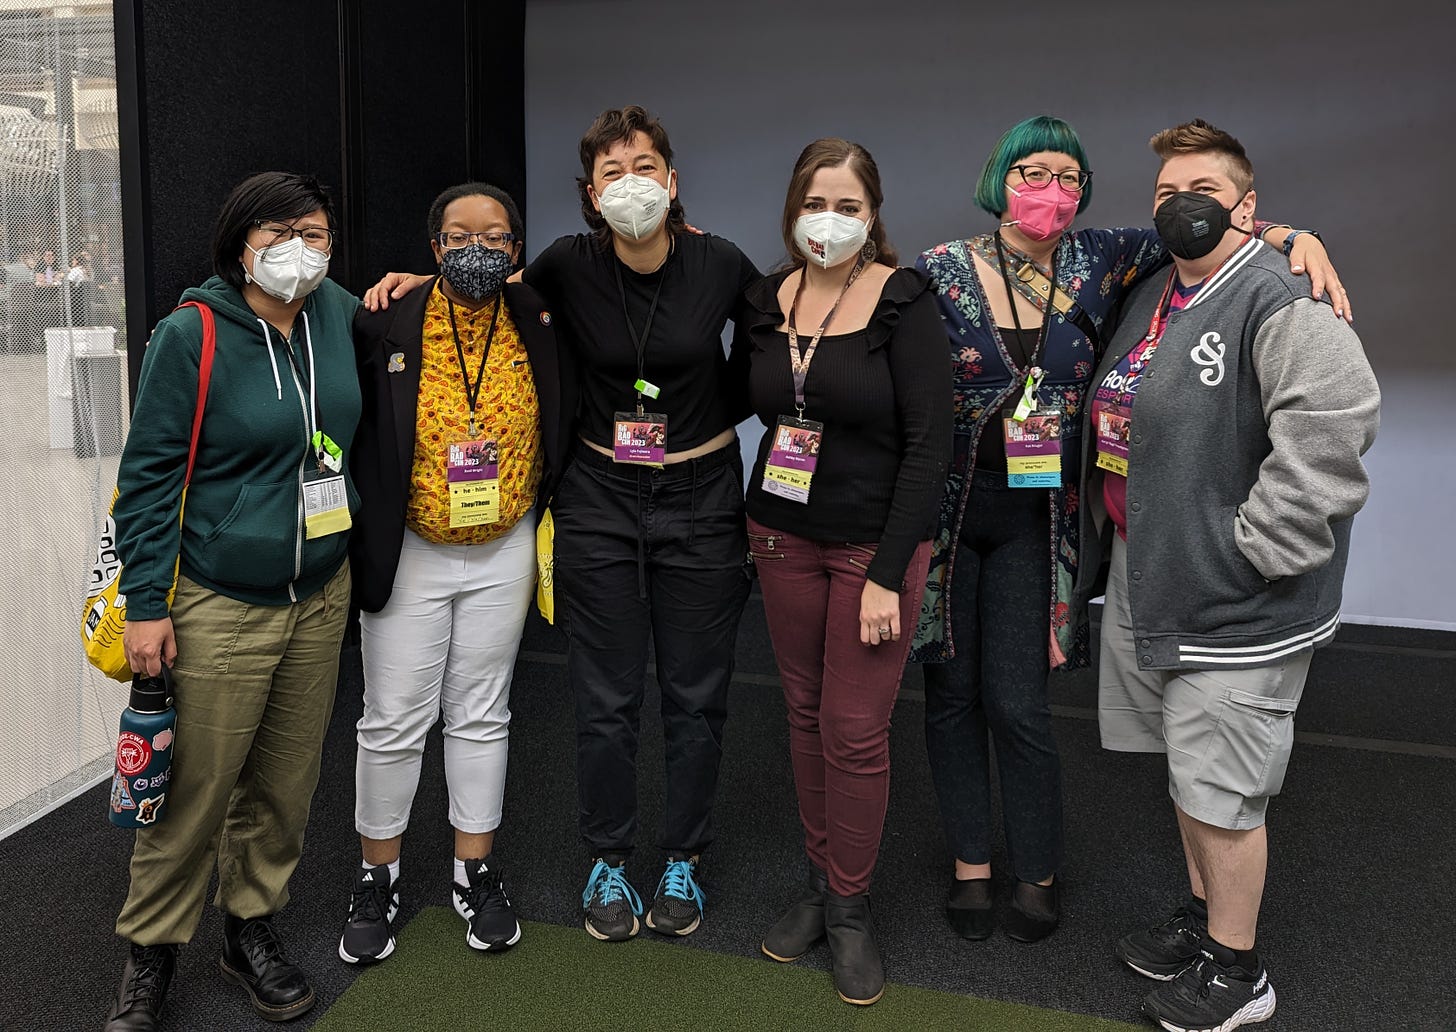 A group of six creatives wearing masks stand side by side in front of a gray wall.